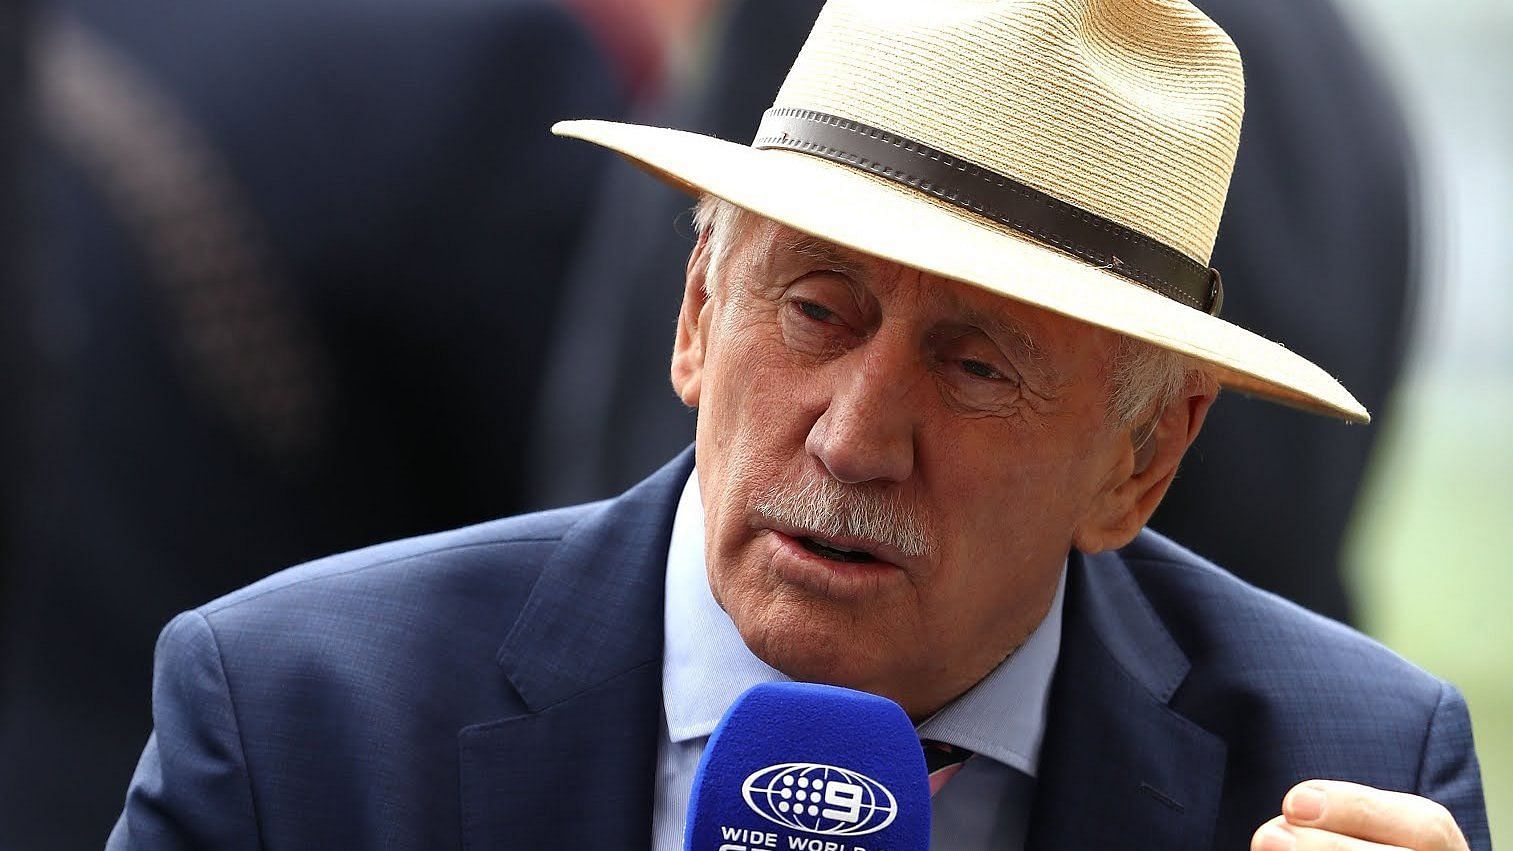 Ian Chappell. (Image Credits: Getty)